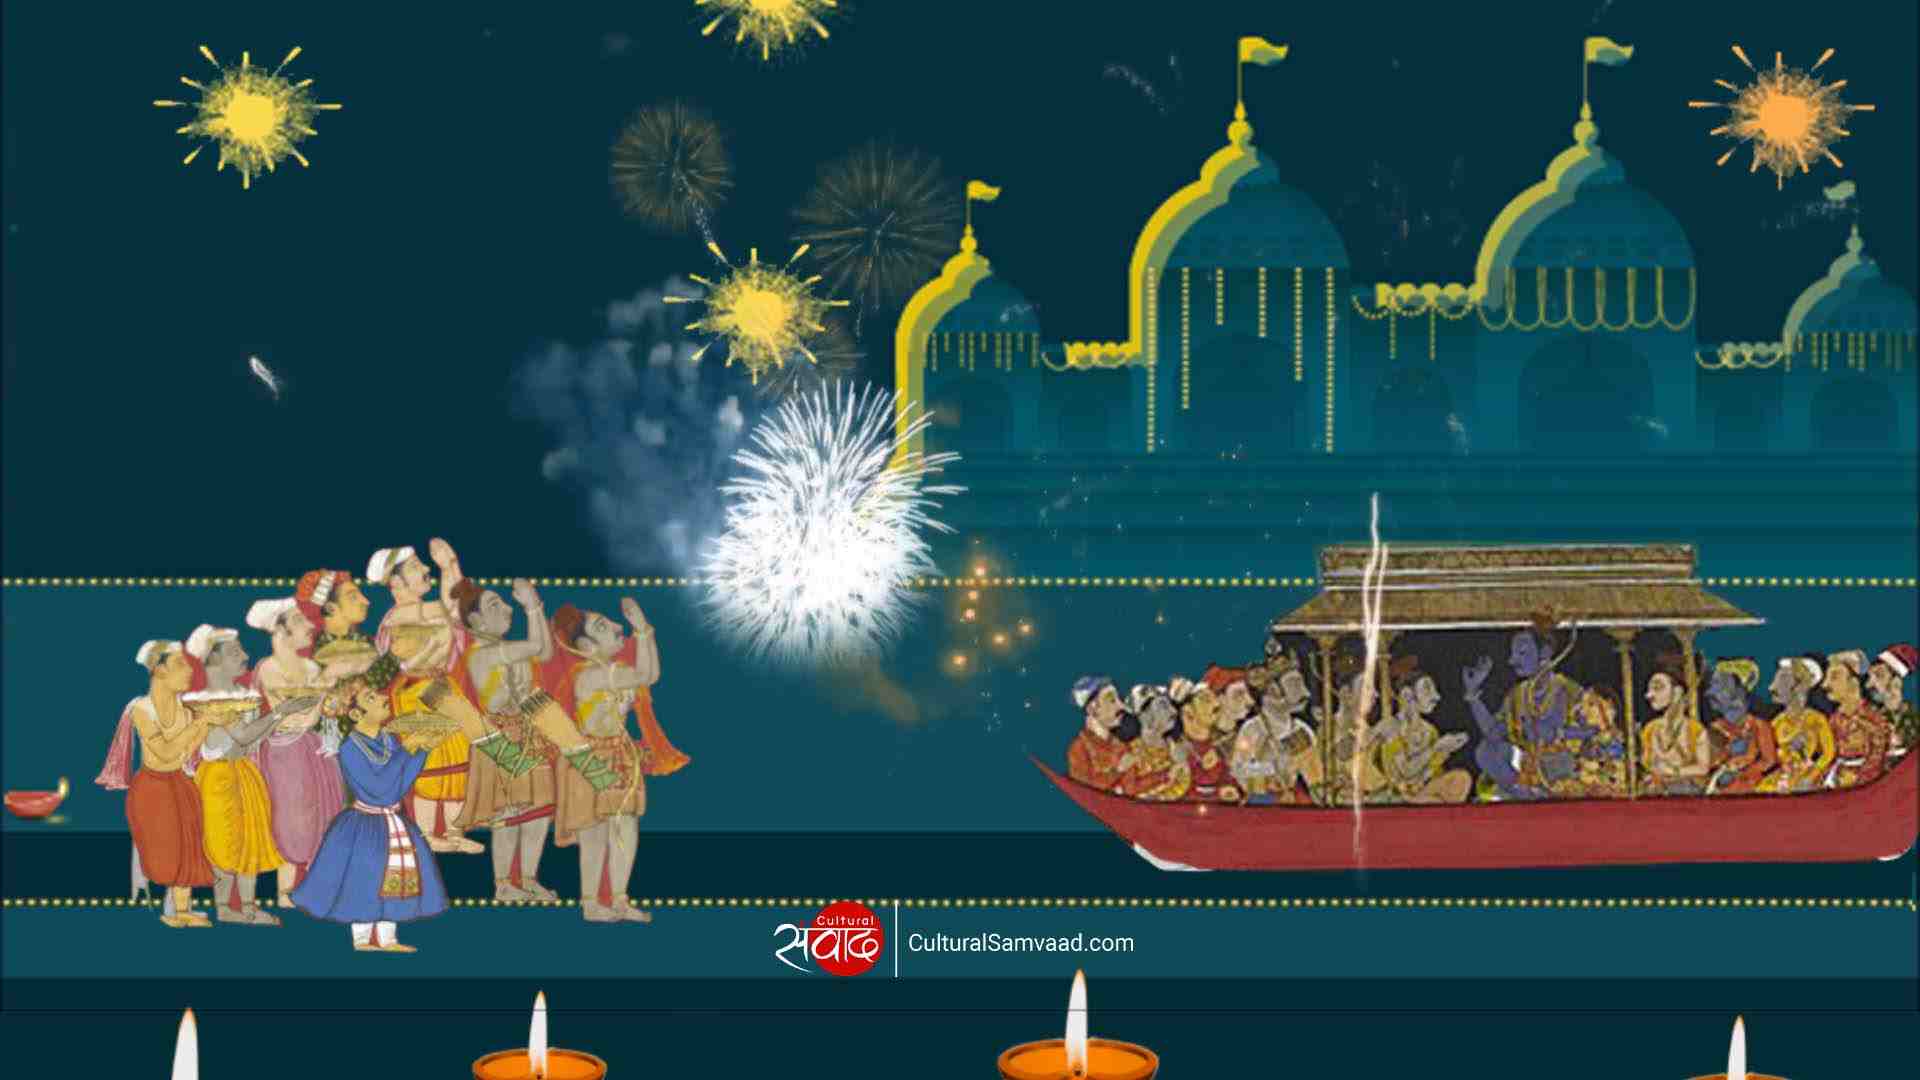 Diwali is celebrated to commemorate the return of Rama to Ayodhya